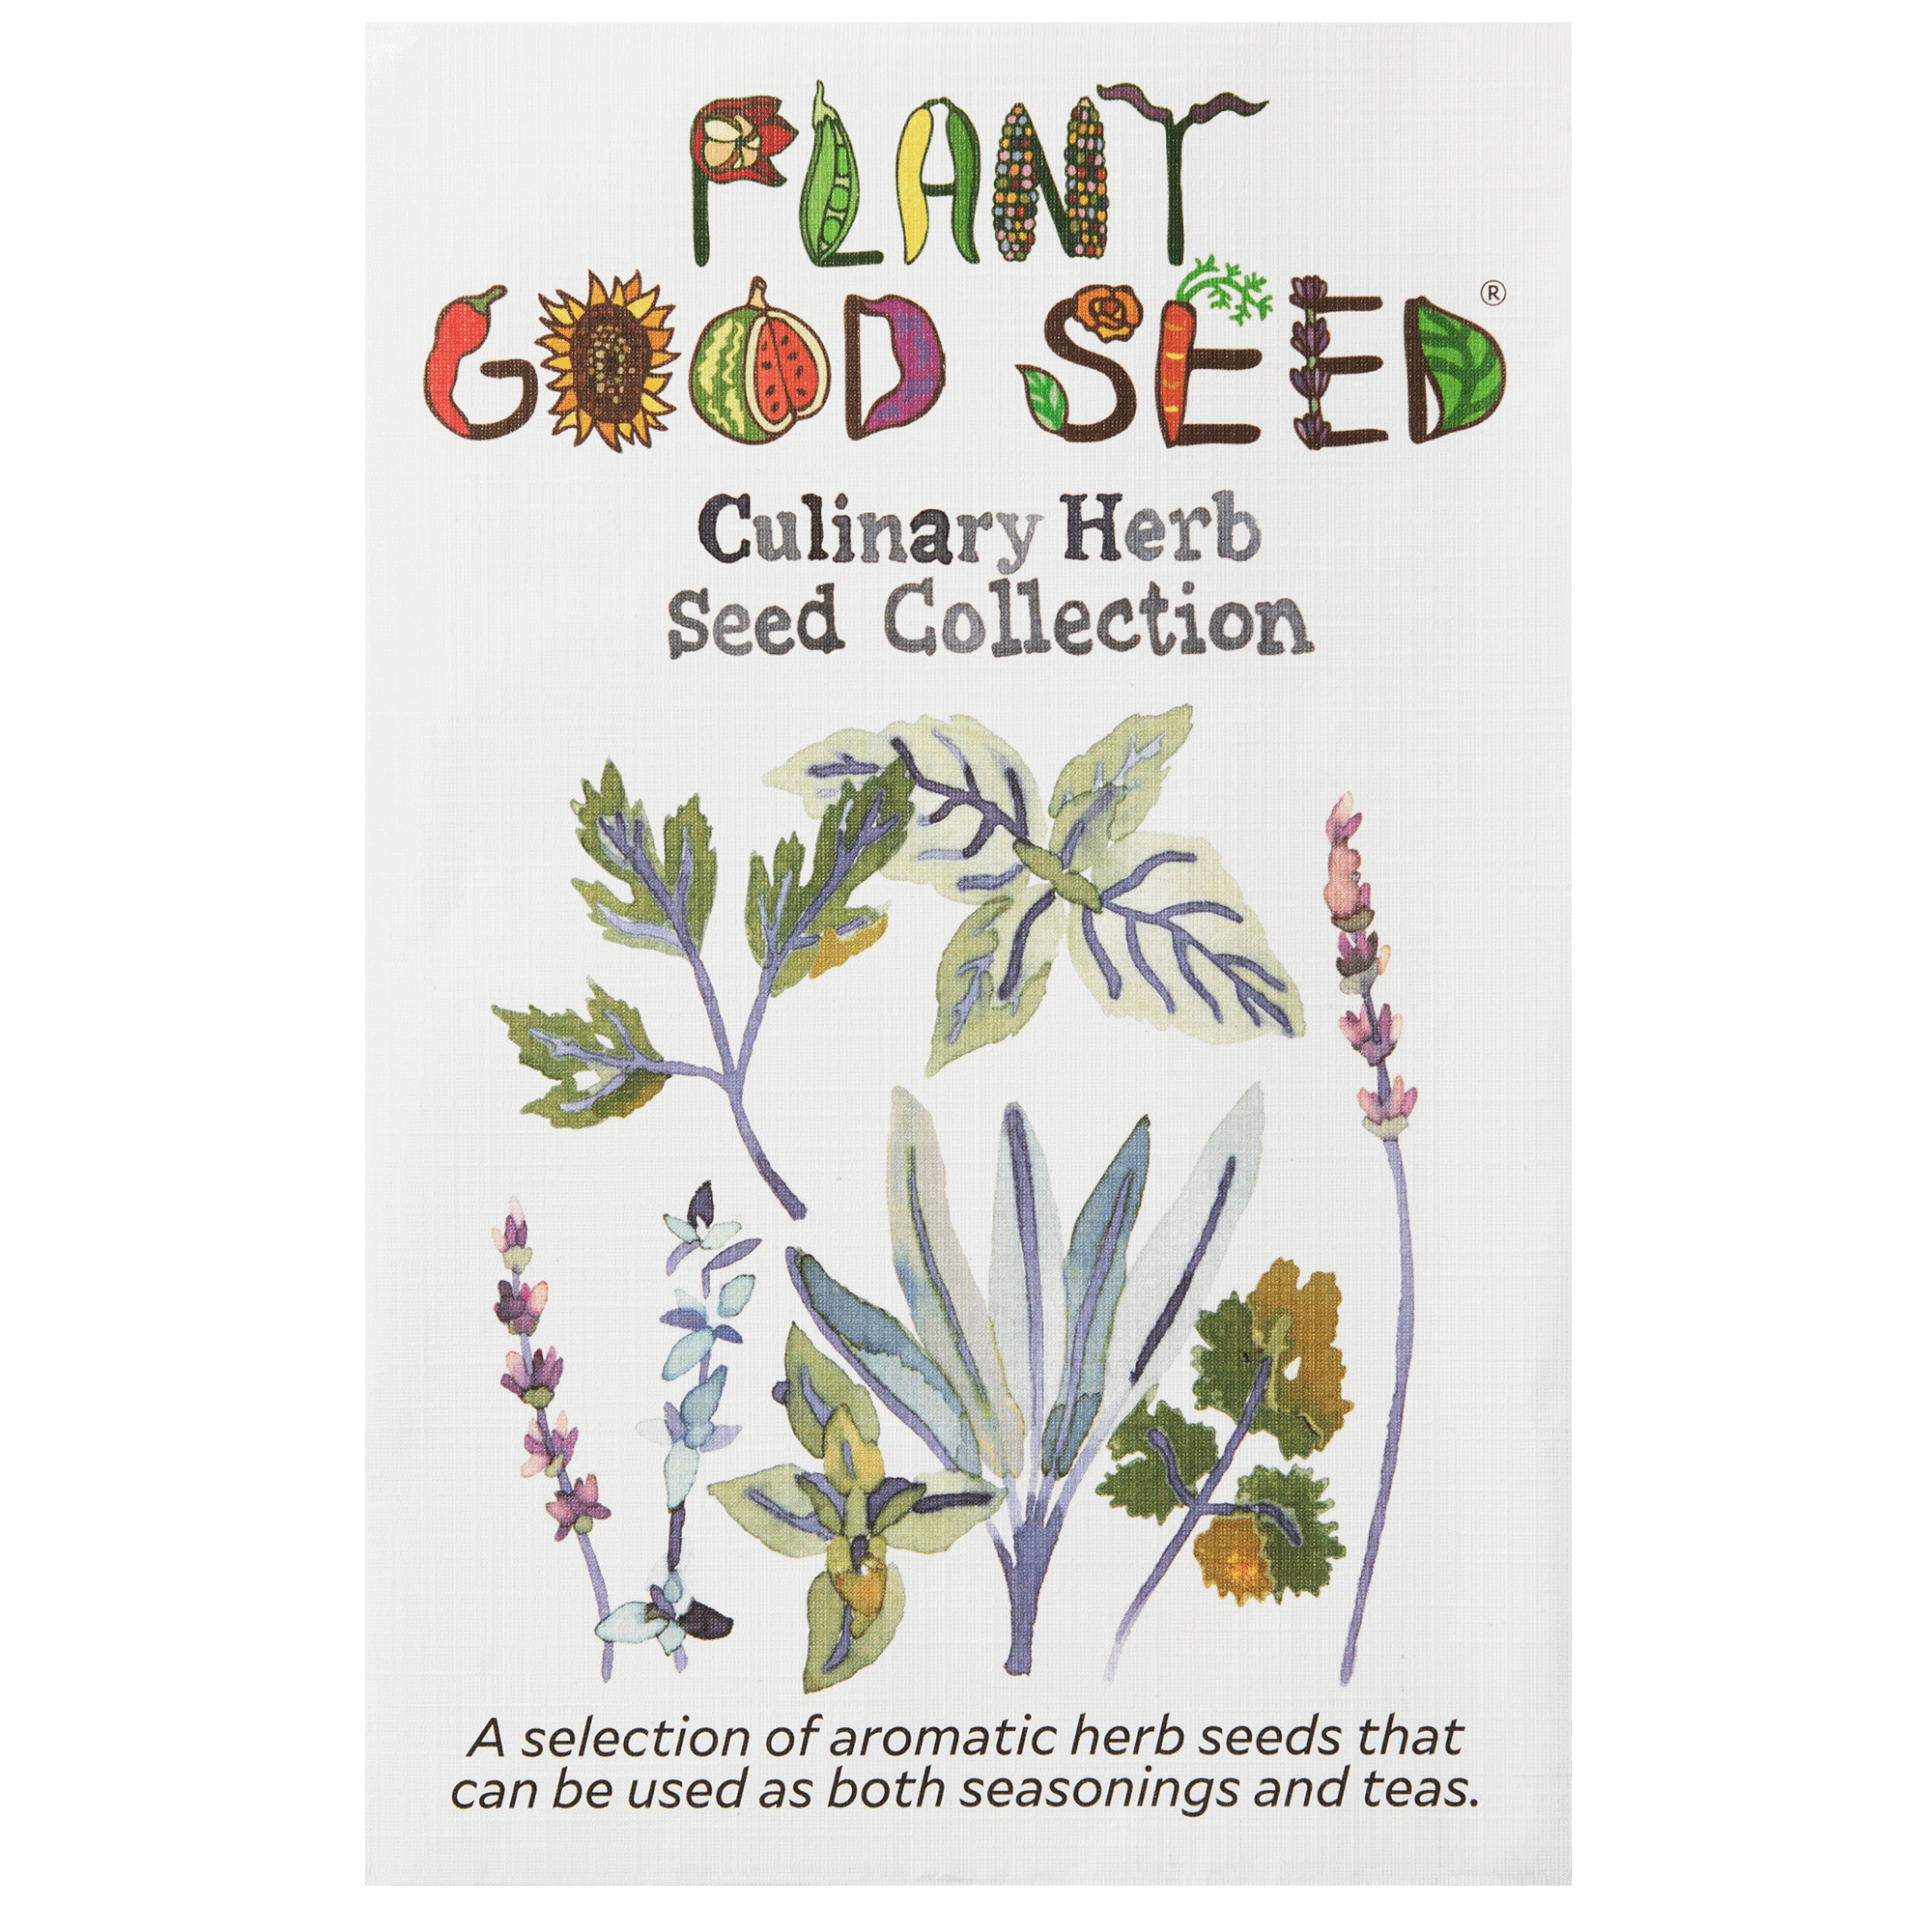 Culinary Herbs Seed Collection